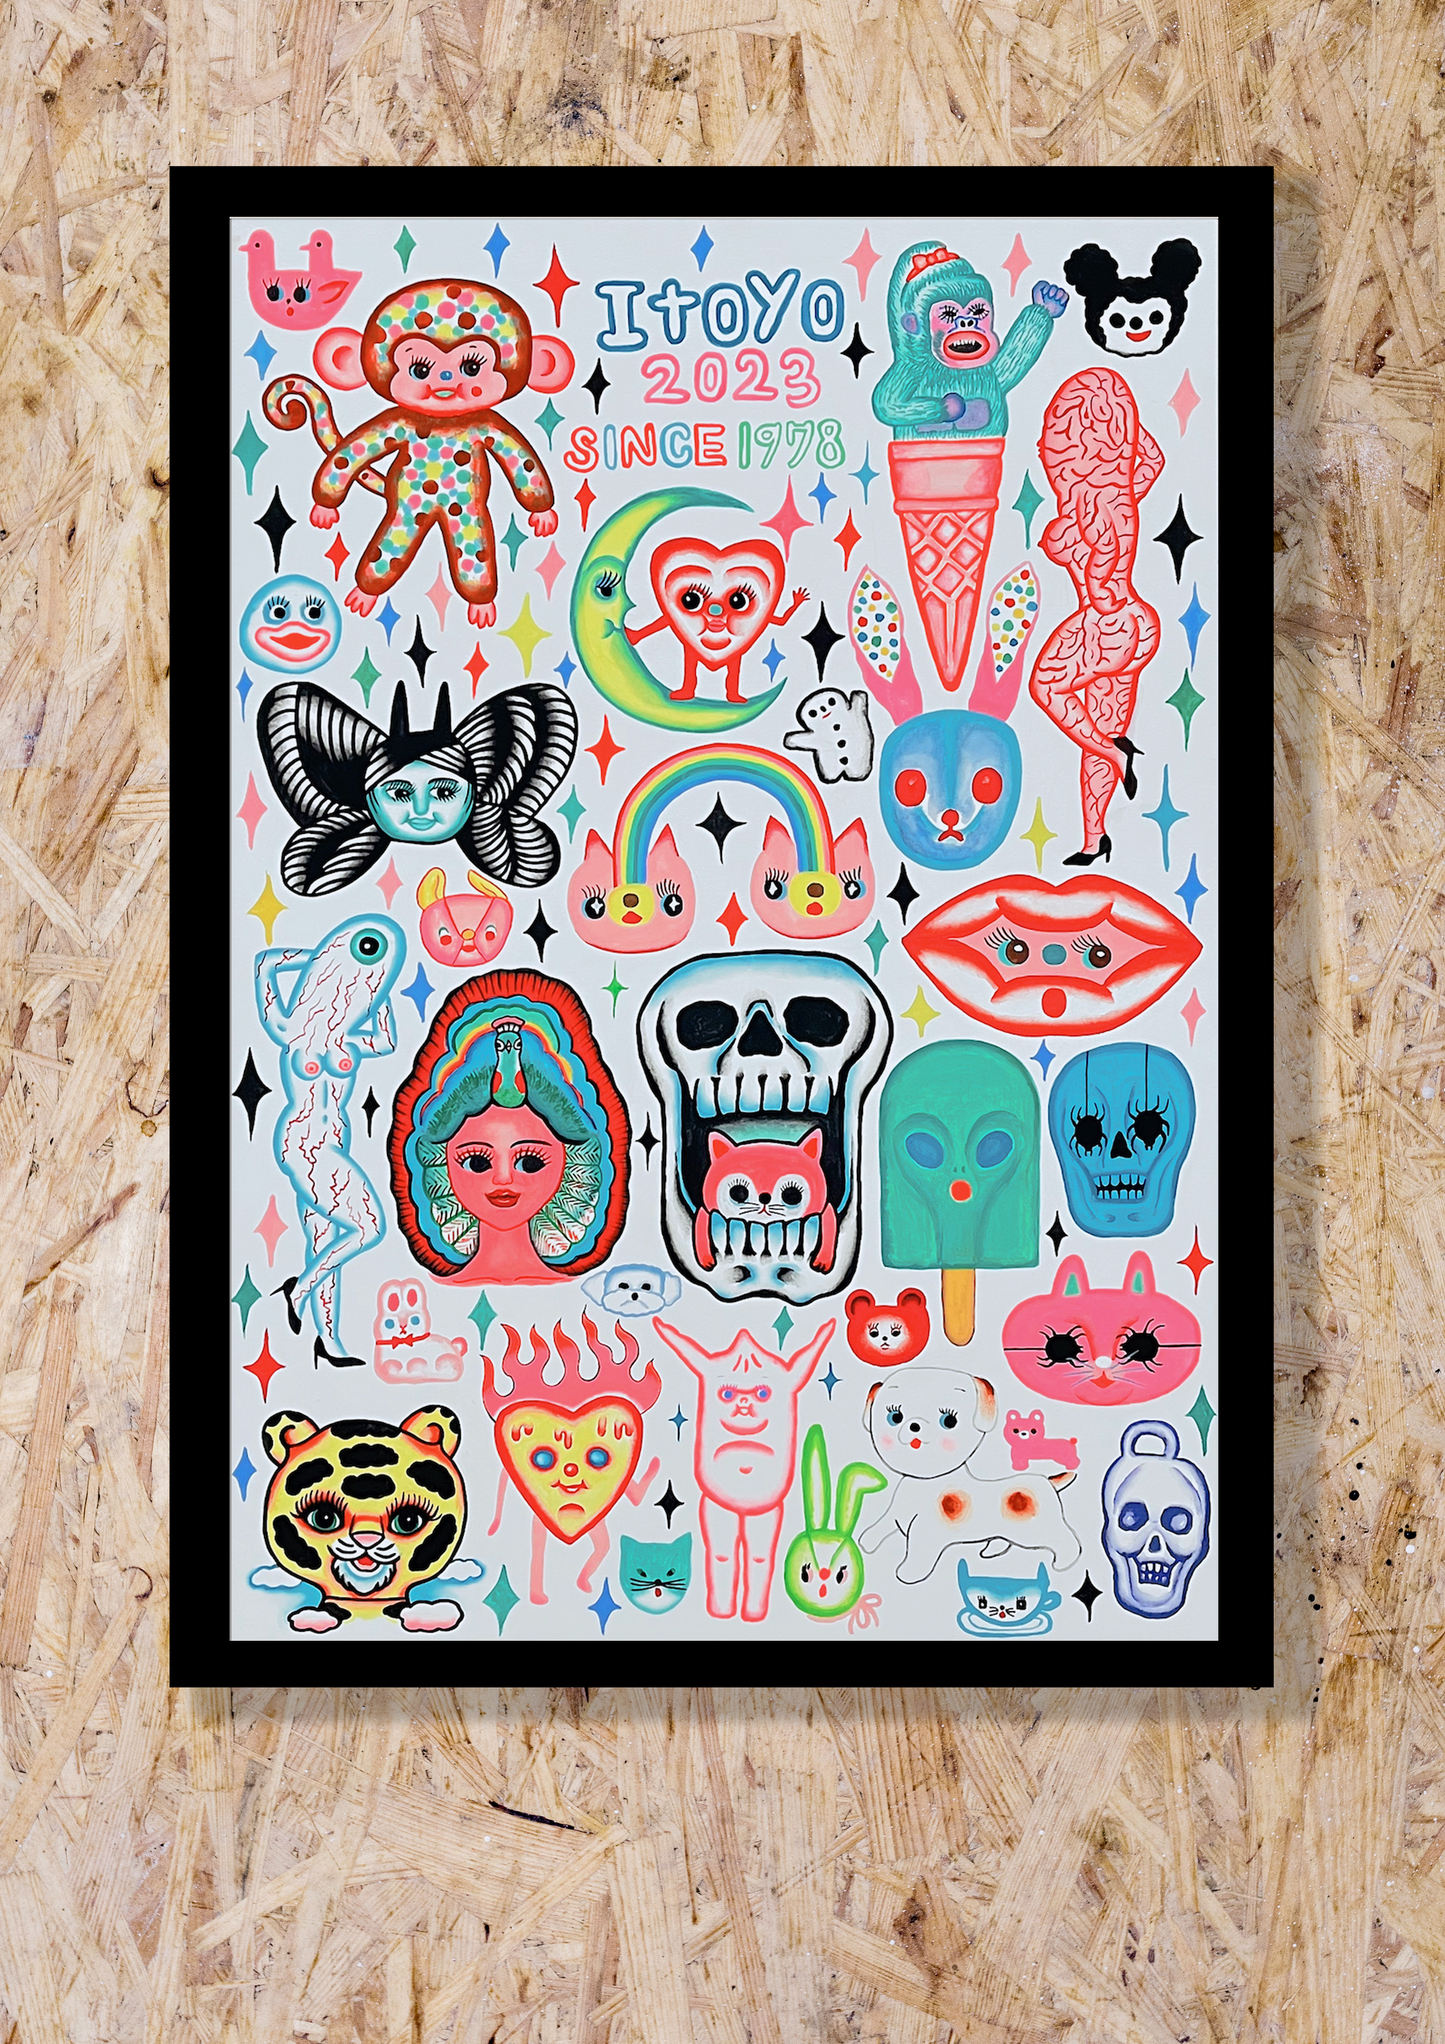 Since 1978 Art PRINT by ITOYO x Family Store